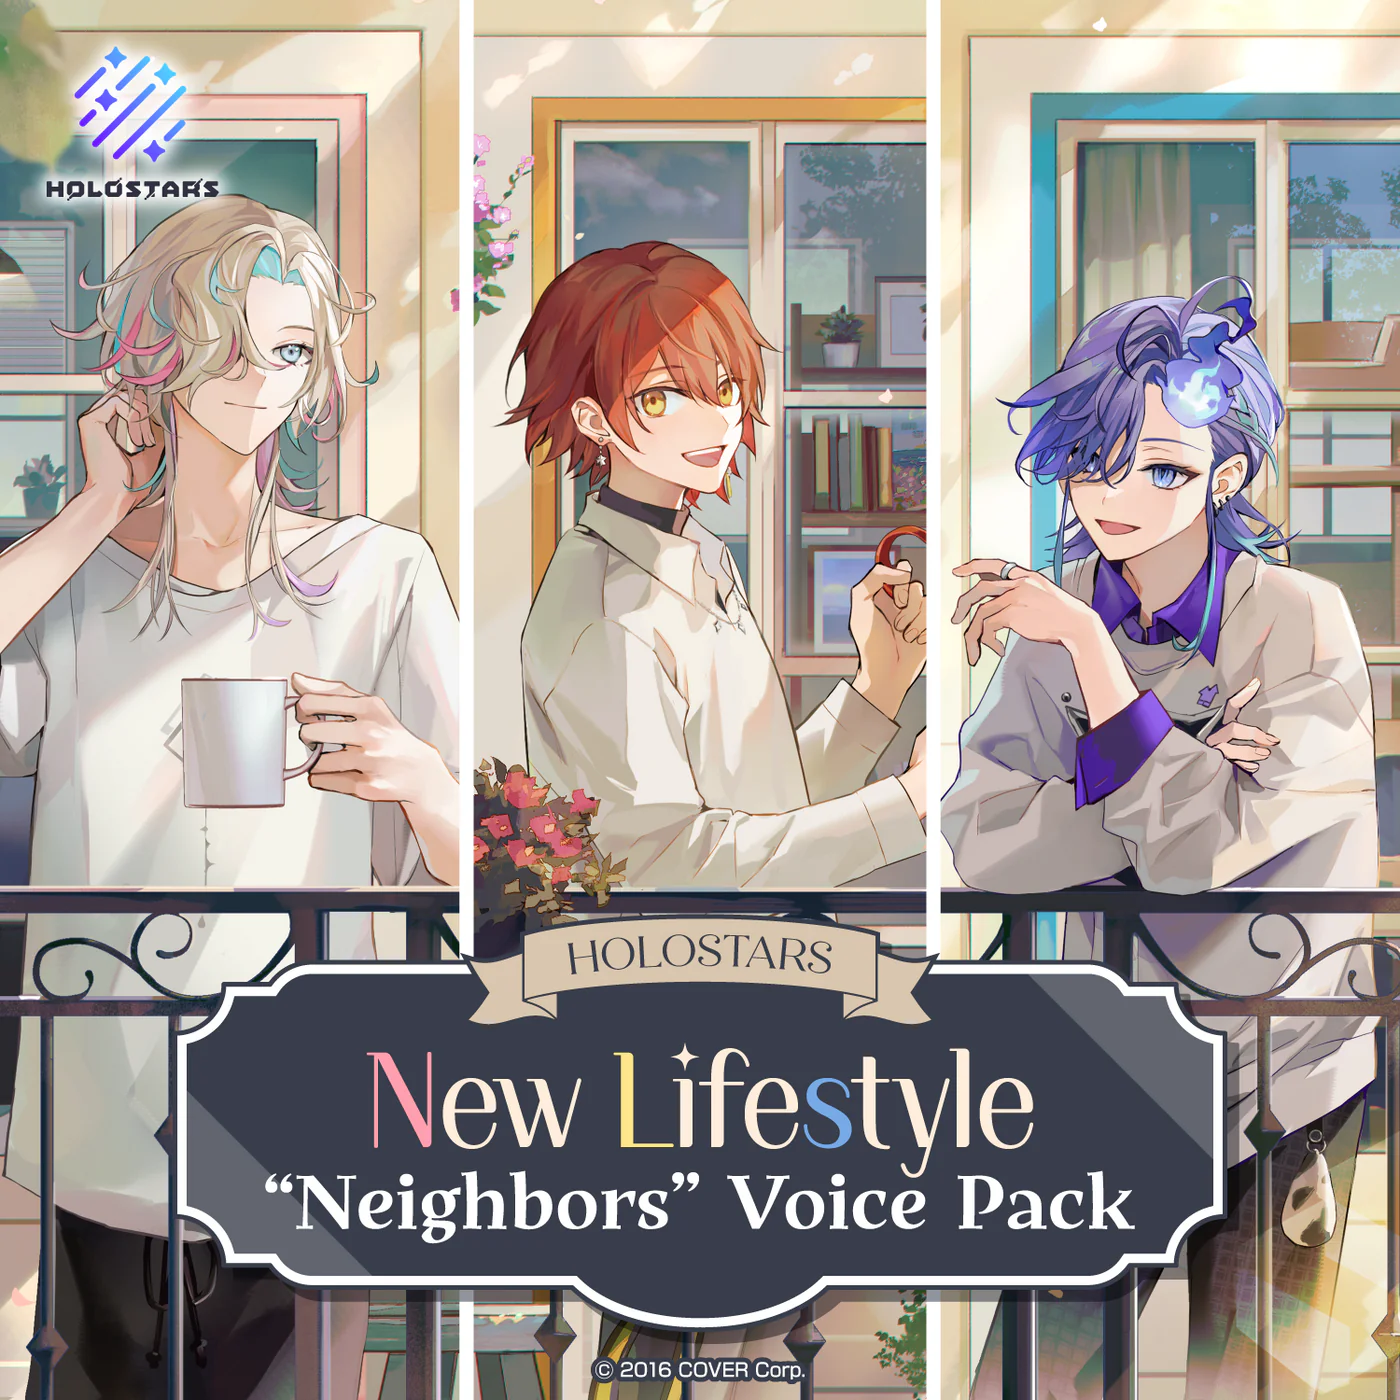 [In stock] HOLOSTARS New Lifestyle "Neighbors" Voice Pack